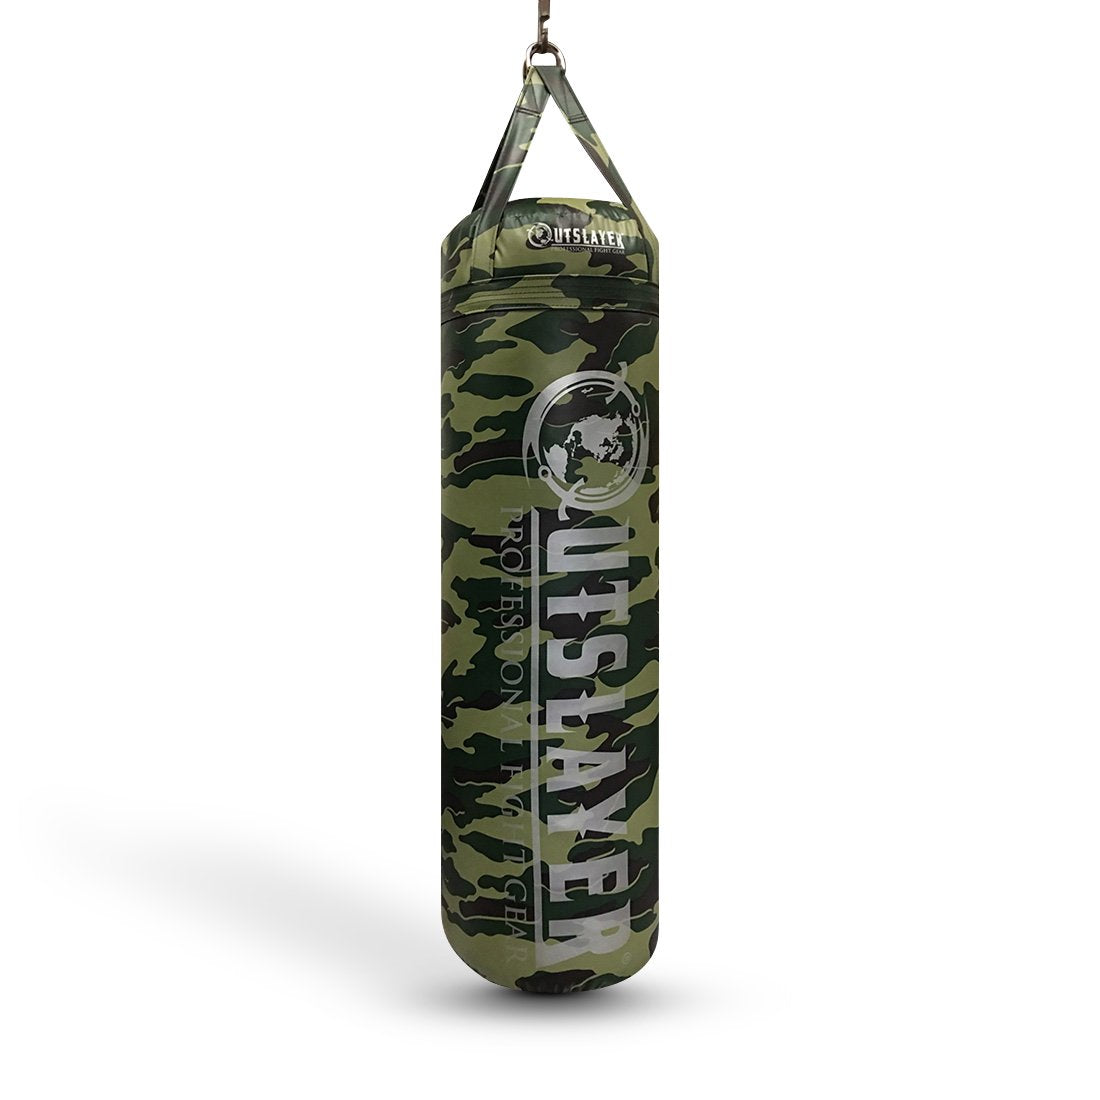 Outslayer OVERSIZED Custom Punching Bags